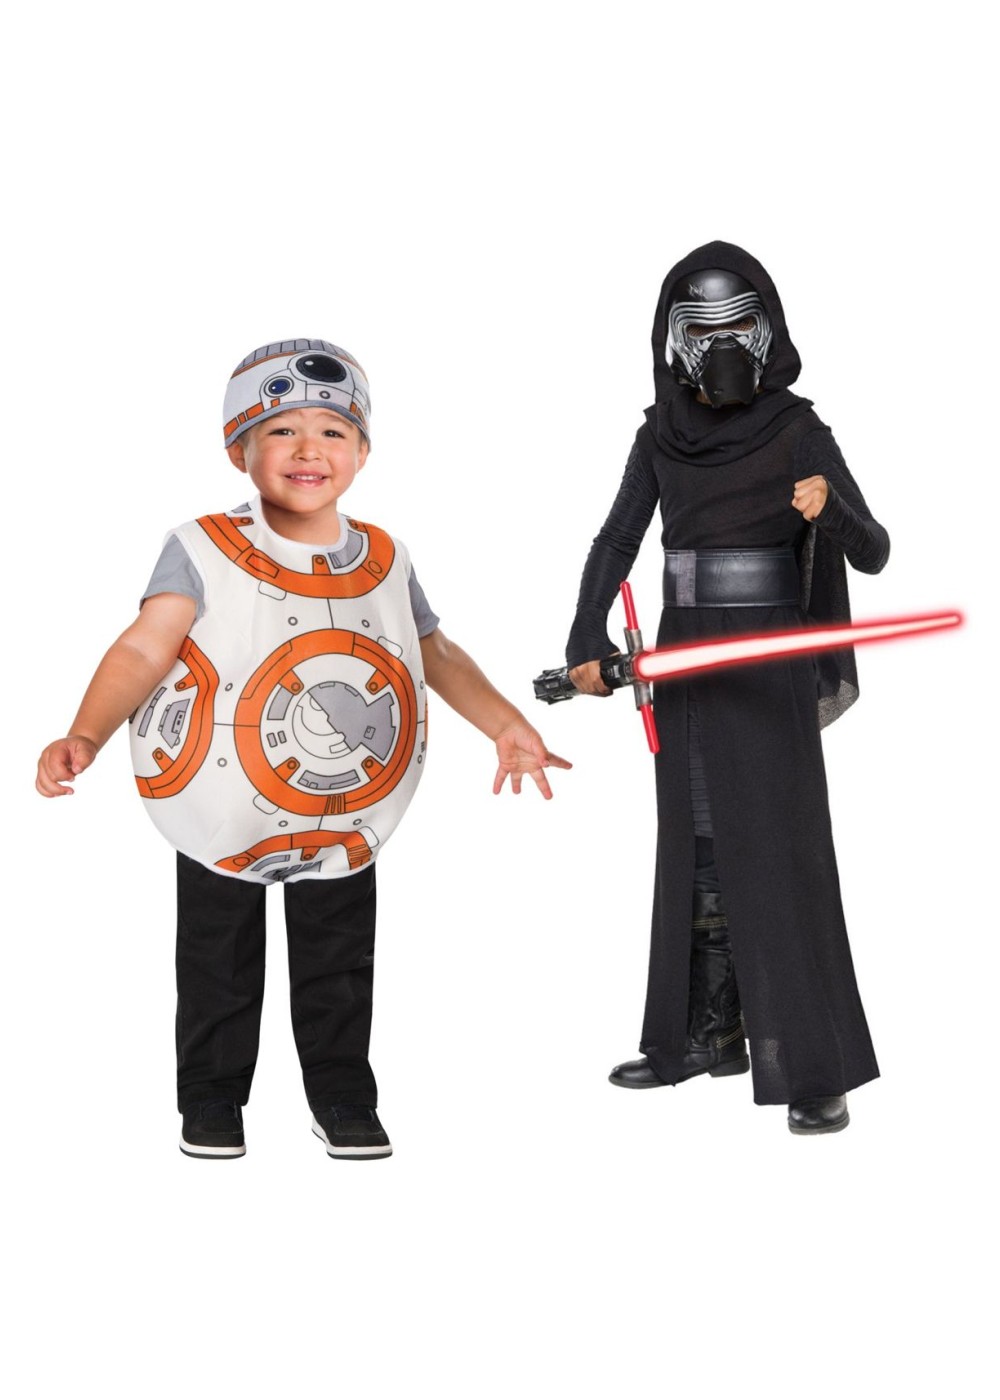 Star Wars Kylo Ren Boys And Bb8 Droid Toddler/child Costume Set